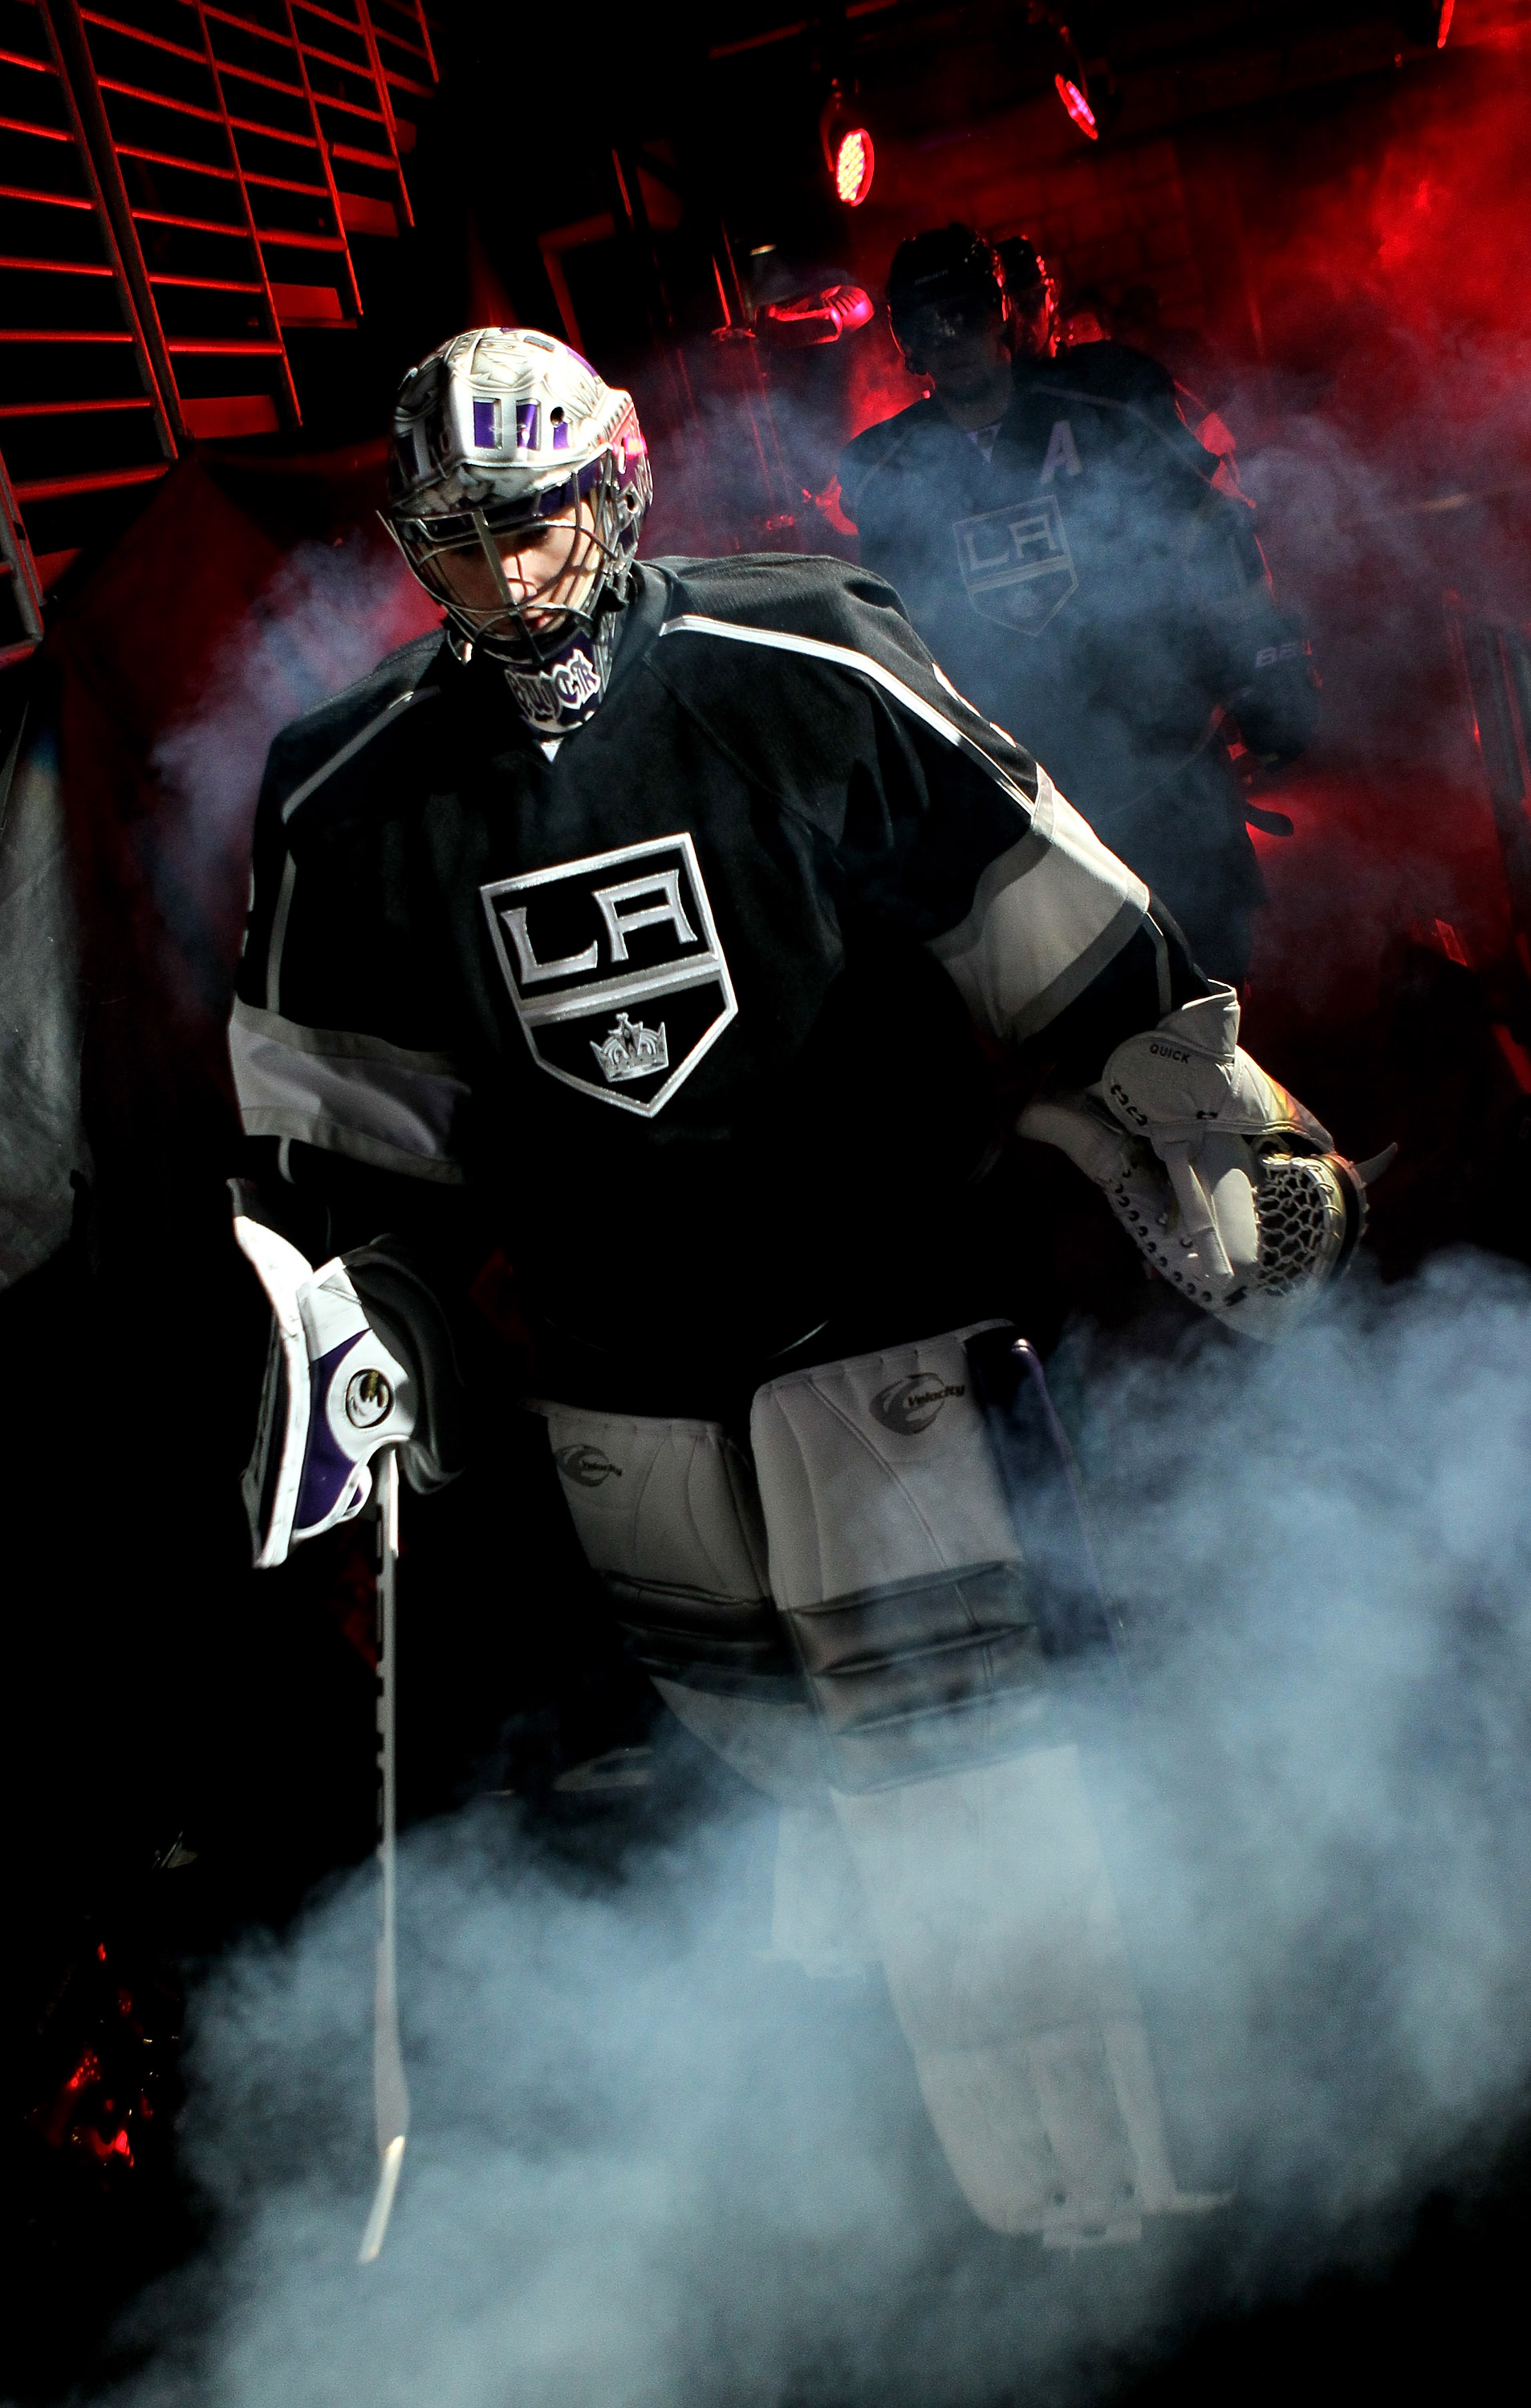 LOS ANGELES, CA - APRIL 25:  Goaltender Jonathan Quick #32 of the Los Angeles Kings leads his team onto the ice against the Vancouver Canucks before Game Six of the Western Conference Quarterfinals of the 2010 NHL Stanley Cup Playoffs on April 25, 2010 at